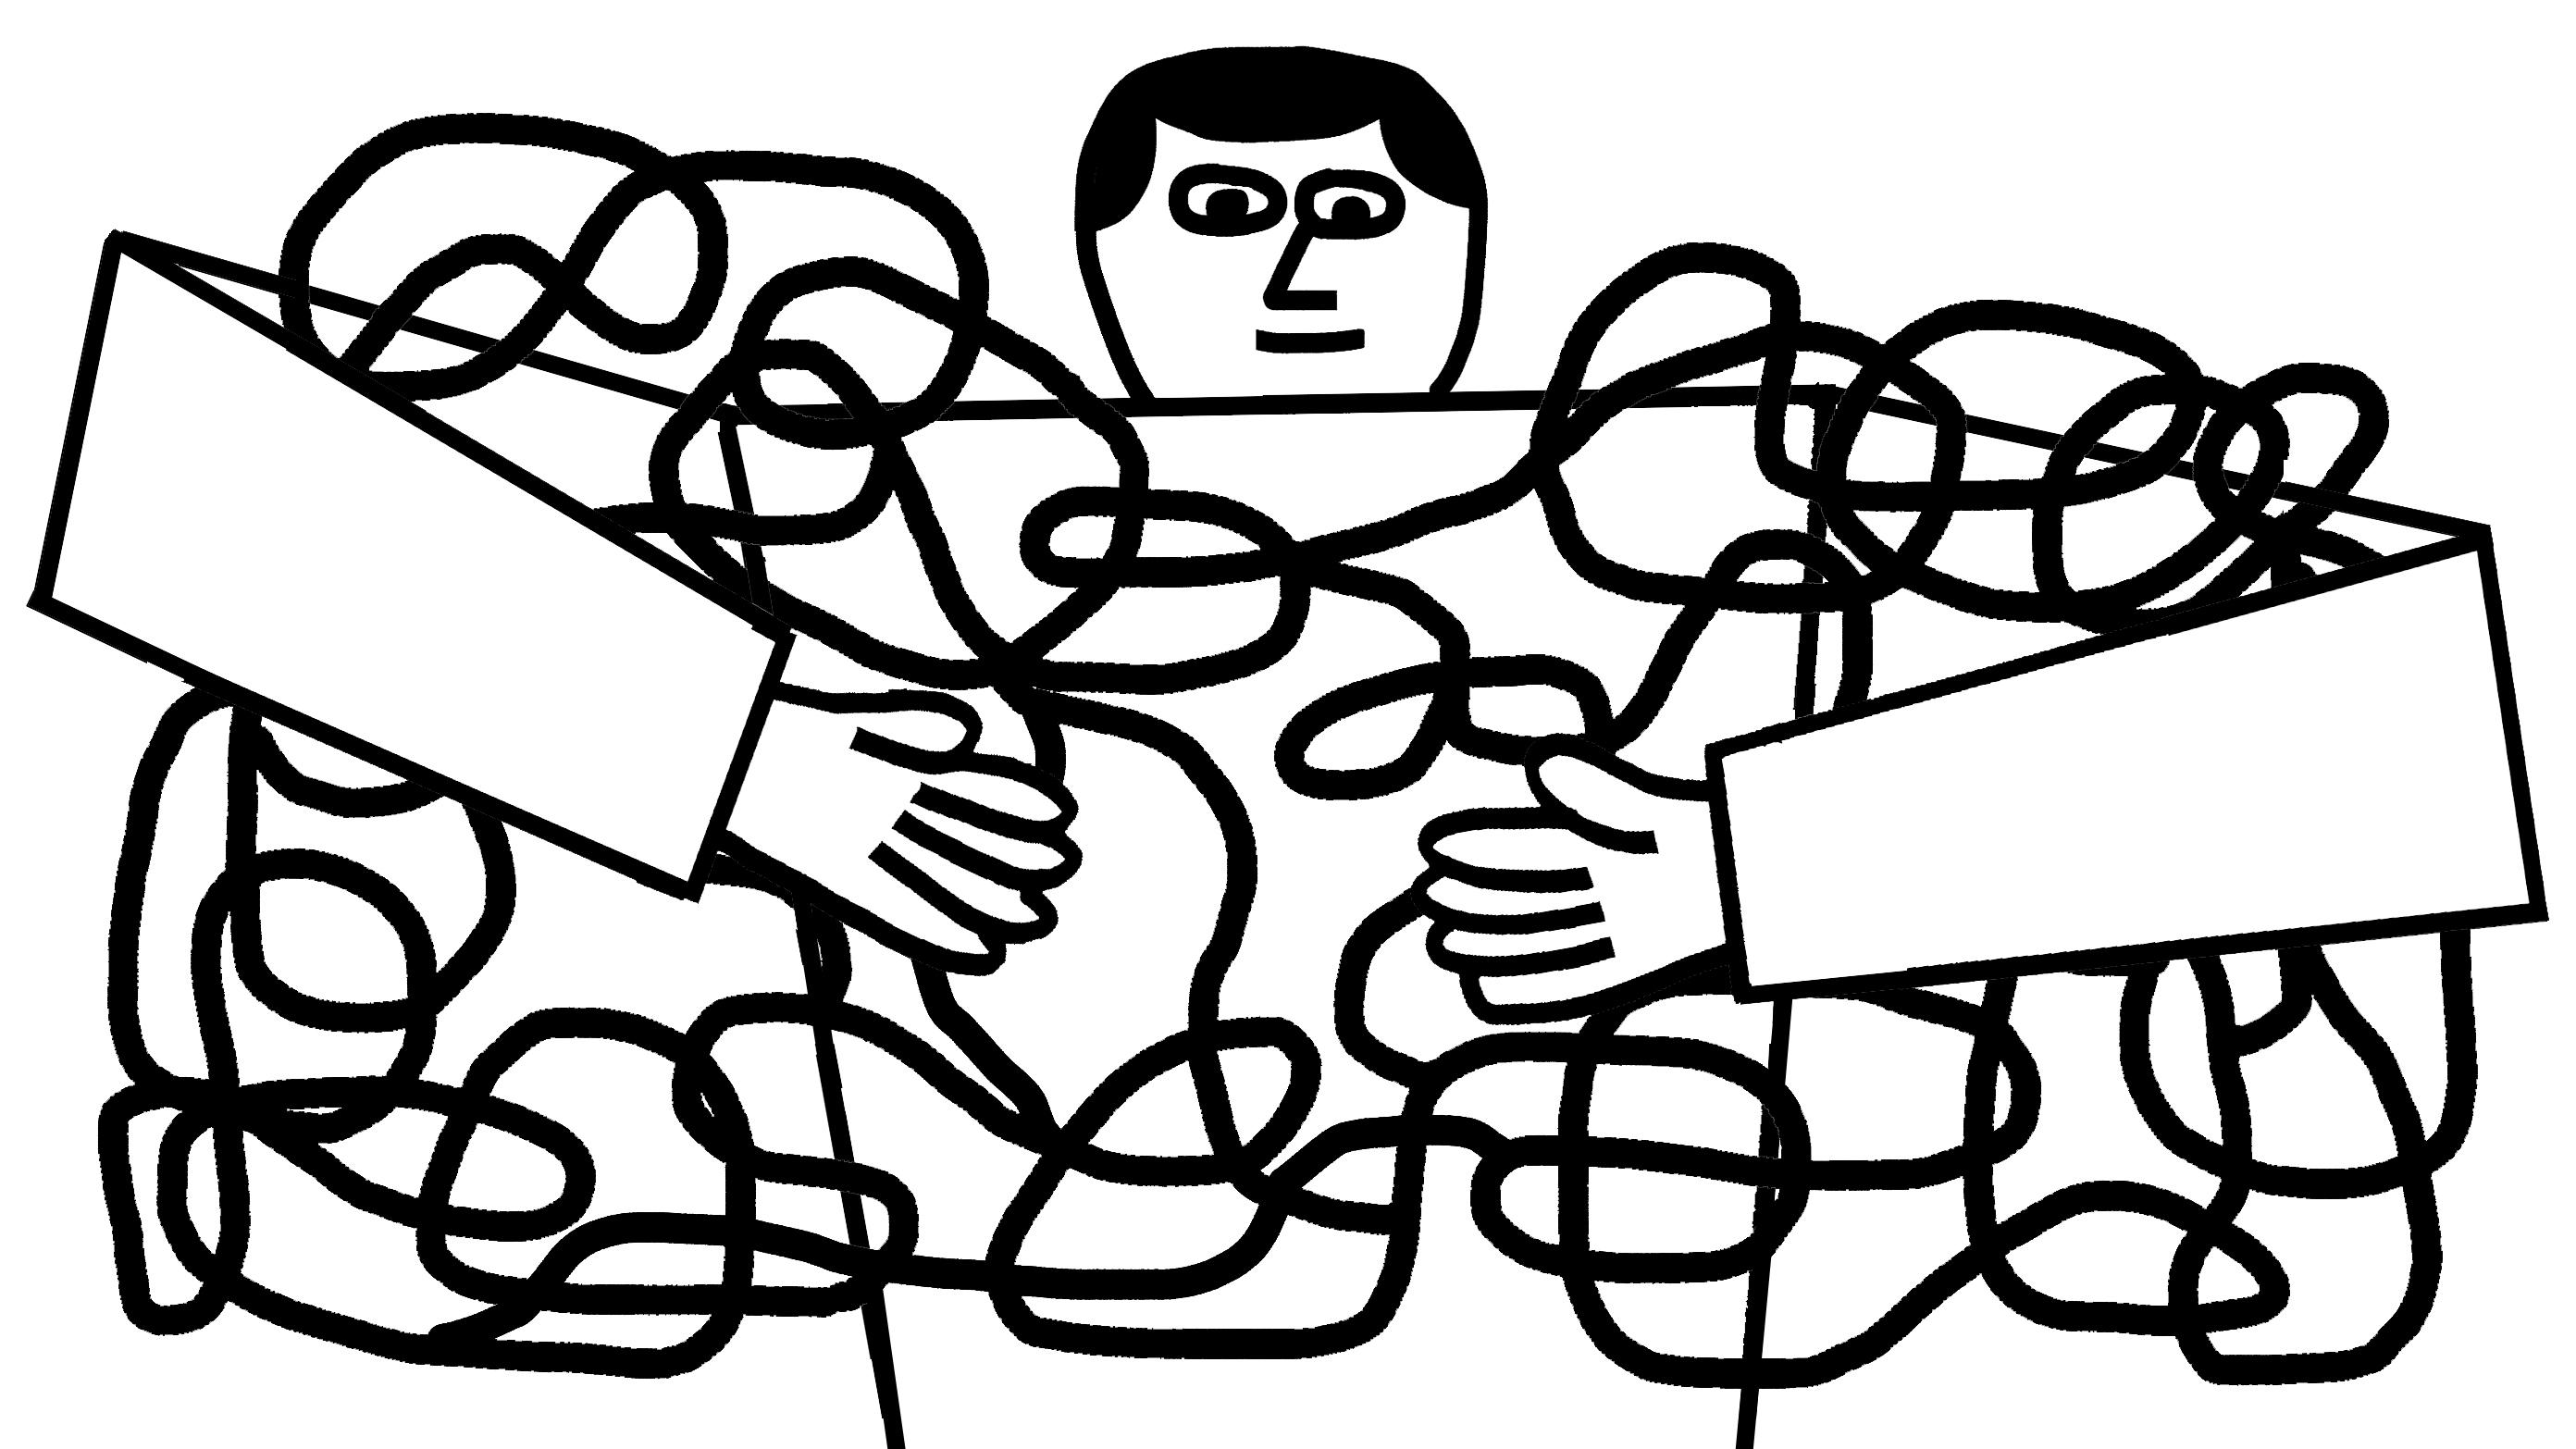 A person embracing chaos, illustrated as hugging an unwieldy squiggly line